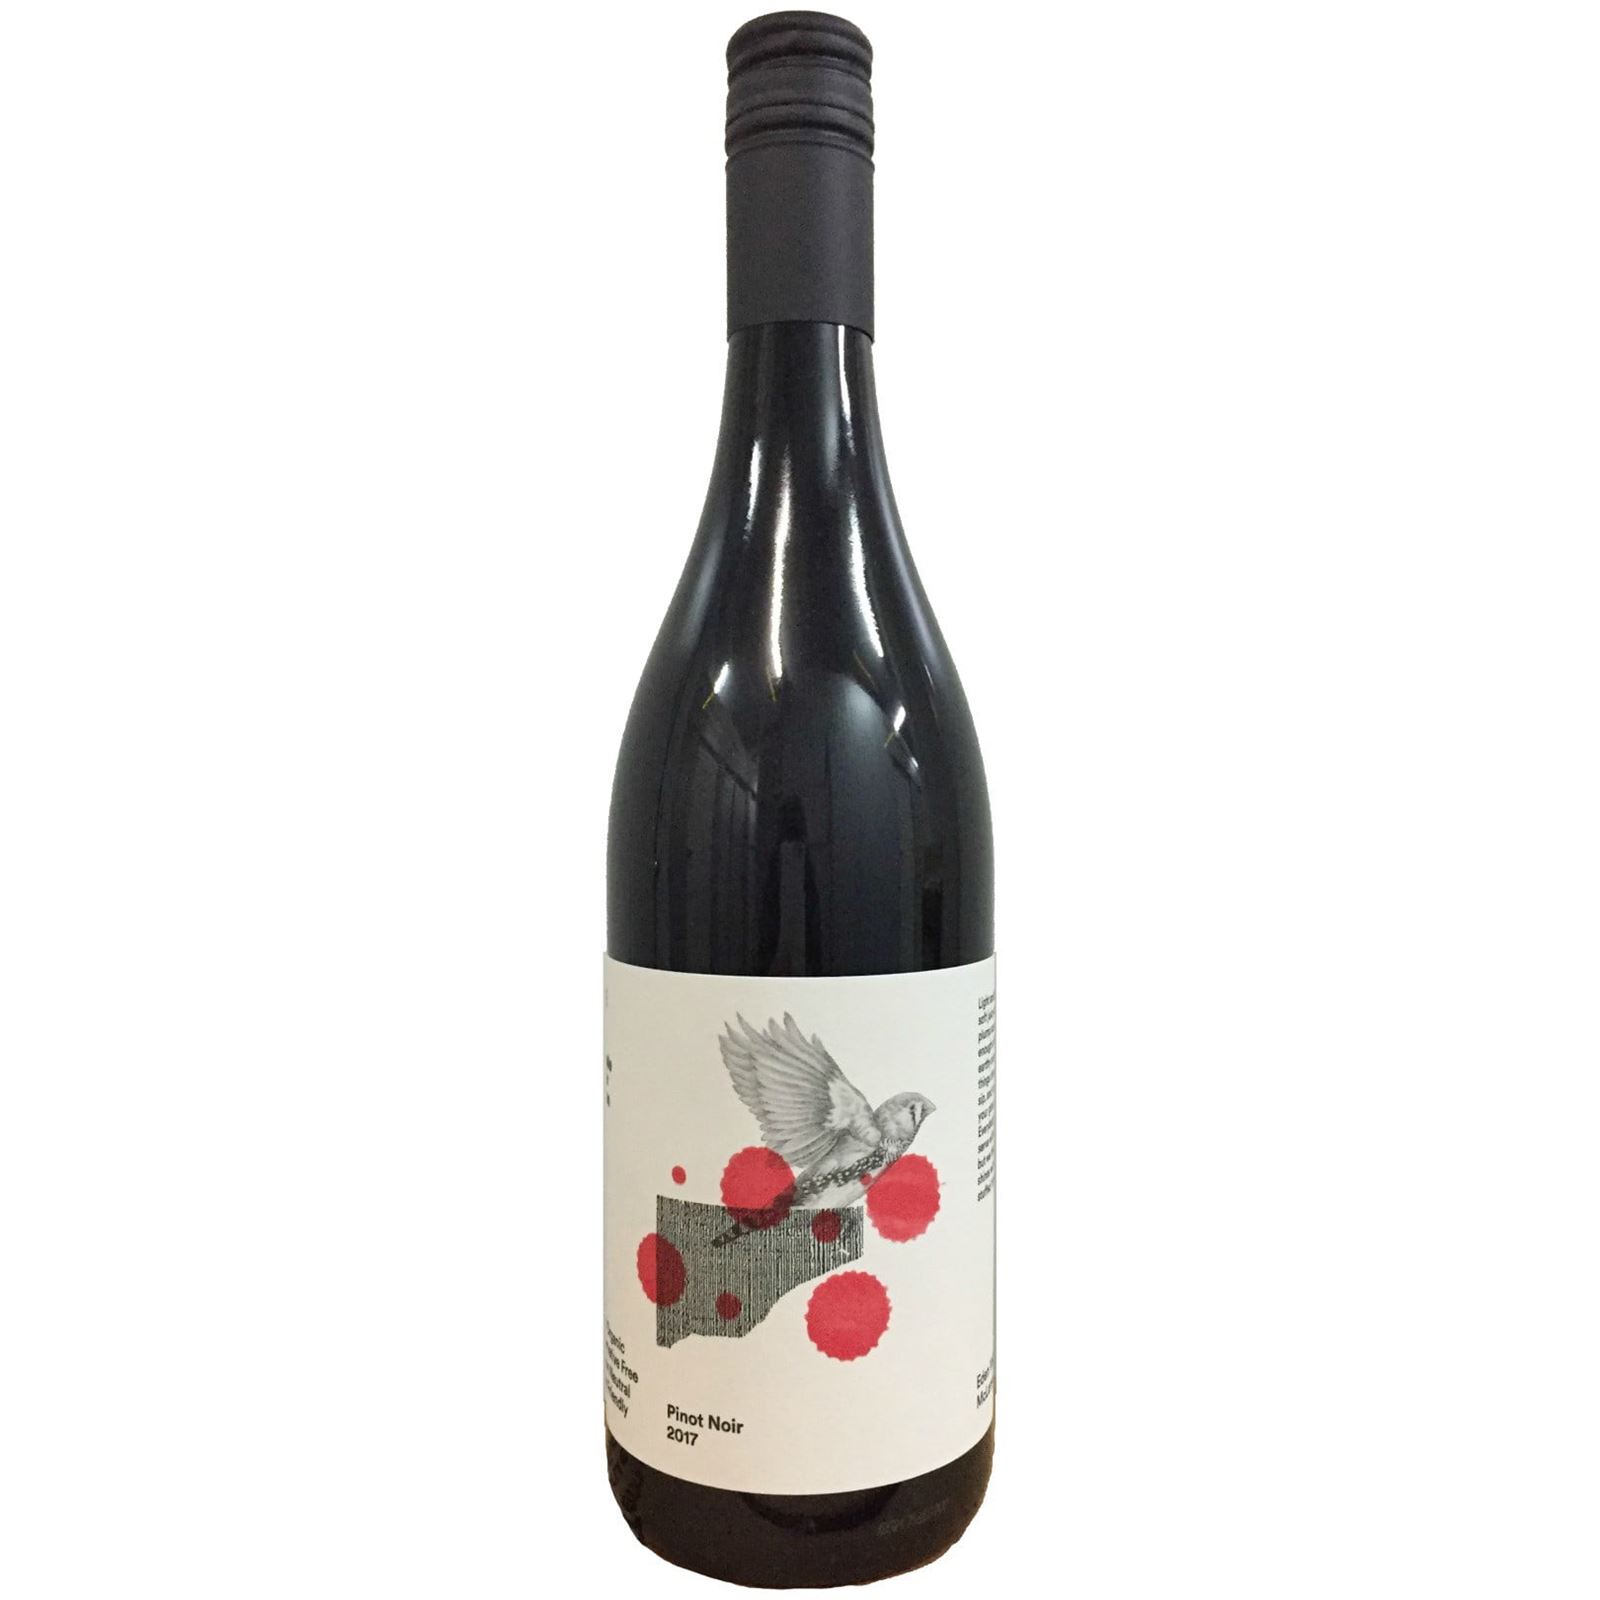 Temple Bruer Organic and Preservative Free Pinot Noir